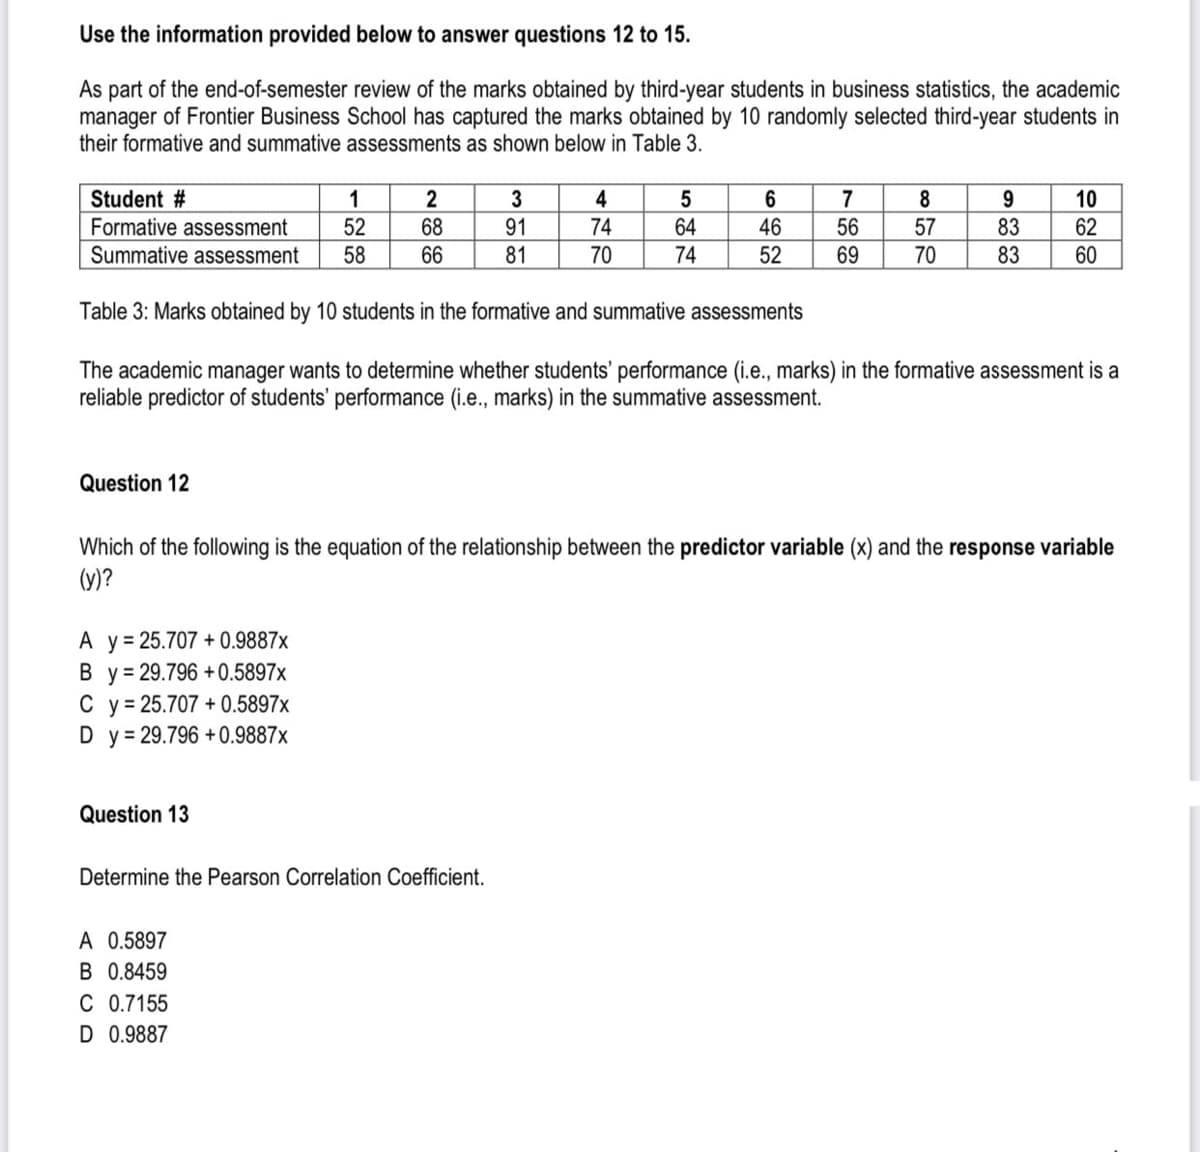 Use the information provided below to answer questions 12 to 15.
As part of the end-of-semester review of the marks obtained by third-year students in business statistics, the academic
manager of Frontier Business School has captured the marks obtained by 10 randomly selected third-year students in
their formative and summative assessments as shown below in Table 3.
Student #
Formative assessment
Summative assessment
Question 12
A y = 25.707 +0.9887x
By= 29.796 +0.5897x
C y = 25.707 +0.5897x
D y = 29.796 +0.9887x
1
52
58
Question 13
2
68
66
A 0.5897
B 0.8459
C 0.7155
D 0.9887
3
91
81
Determine the Pearson Correlation Coefficient.
4
74
70
5
64
74
6
46
52
Table 3: Marks obtained by 10 students in the formative and summative assessments
The academic manager wants to determine whether students' performance (i.e., marks) in the formative assessment is a
reliable predictor of students' performance (i.e., marks) in the summative assessment.
7
56
69
8
57
70
Which of the following is the equation of the relationship between the predictor variable (x) and the response variable
(y)?
9
83
83
10
62
60